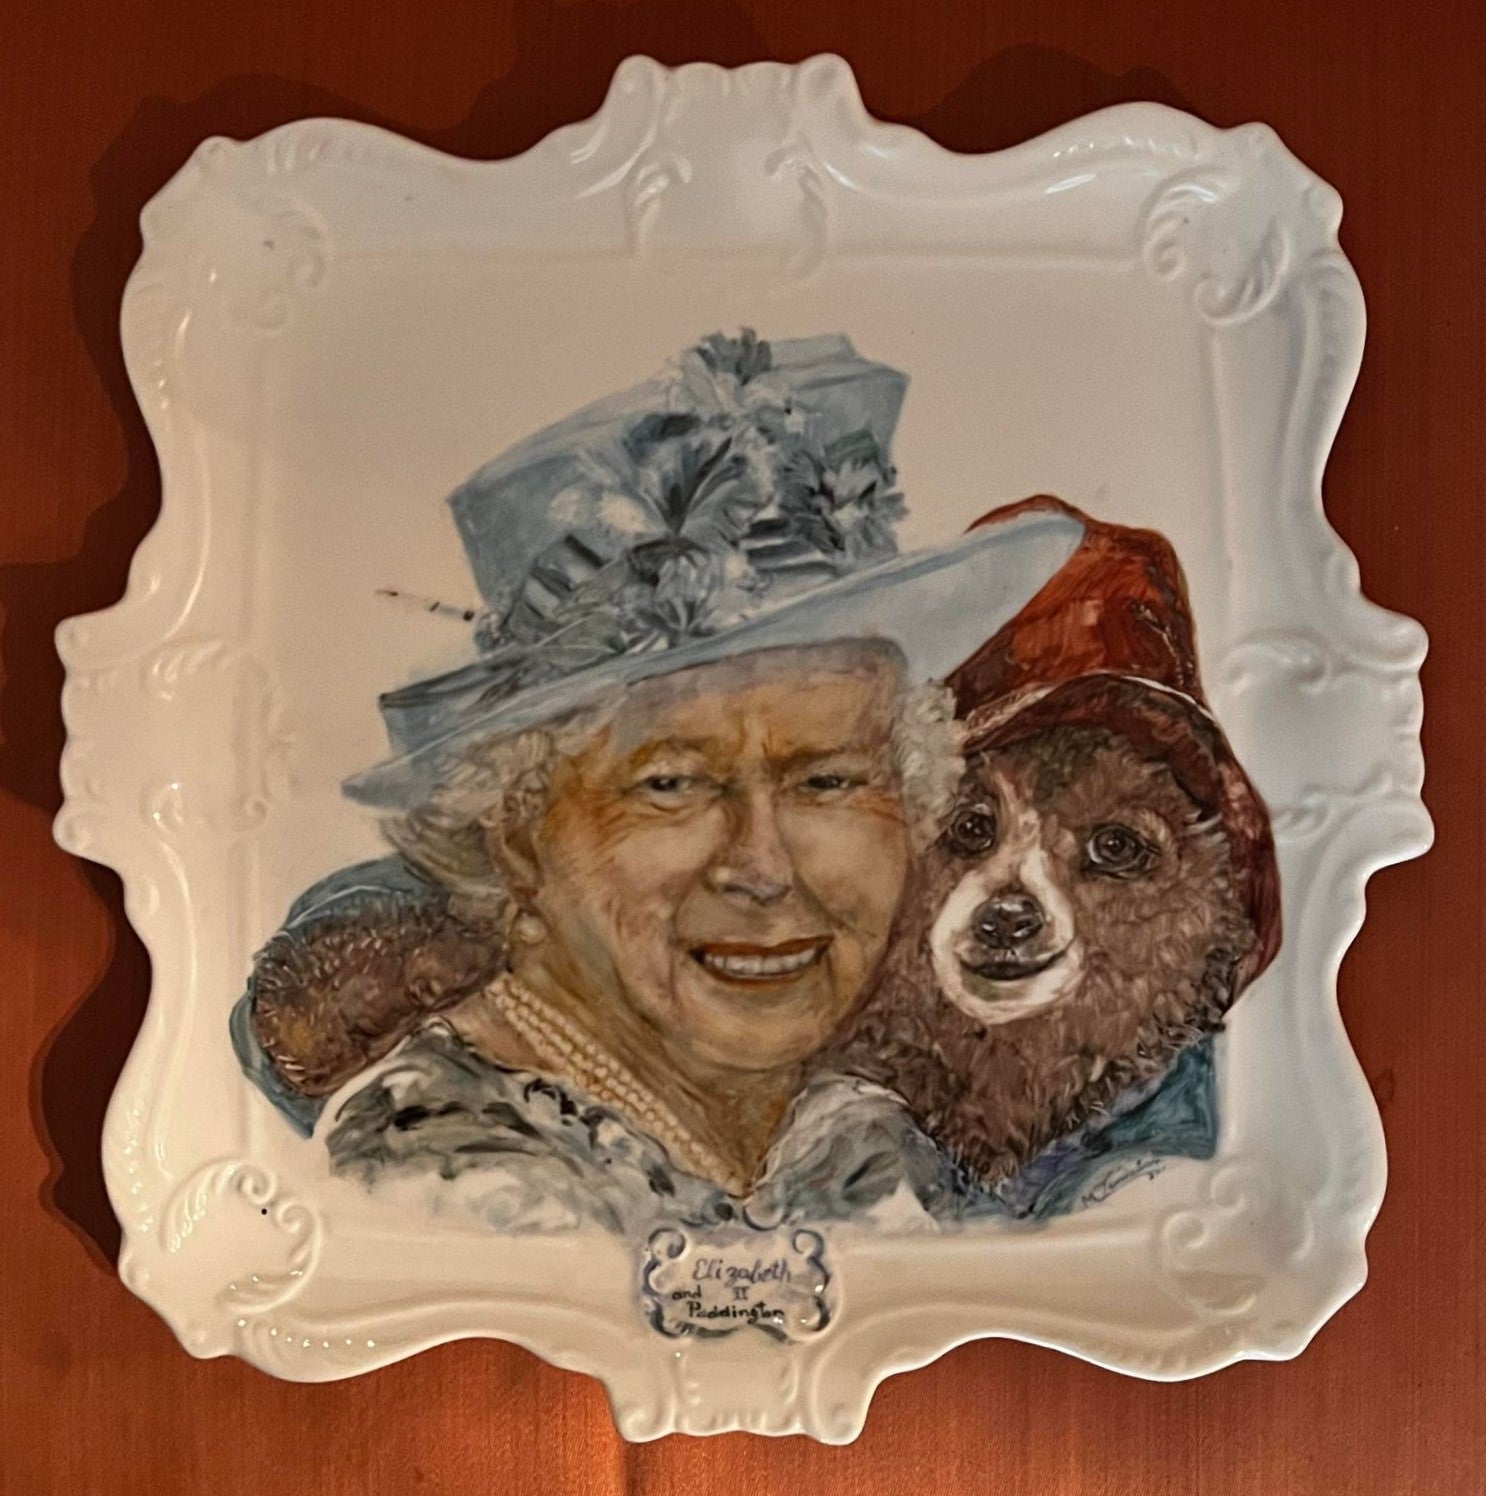 square platter with queen and paddington bear